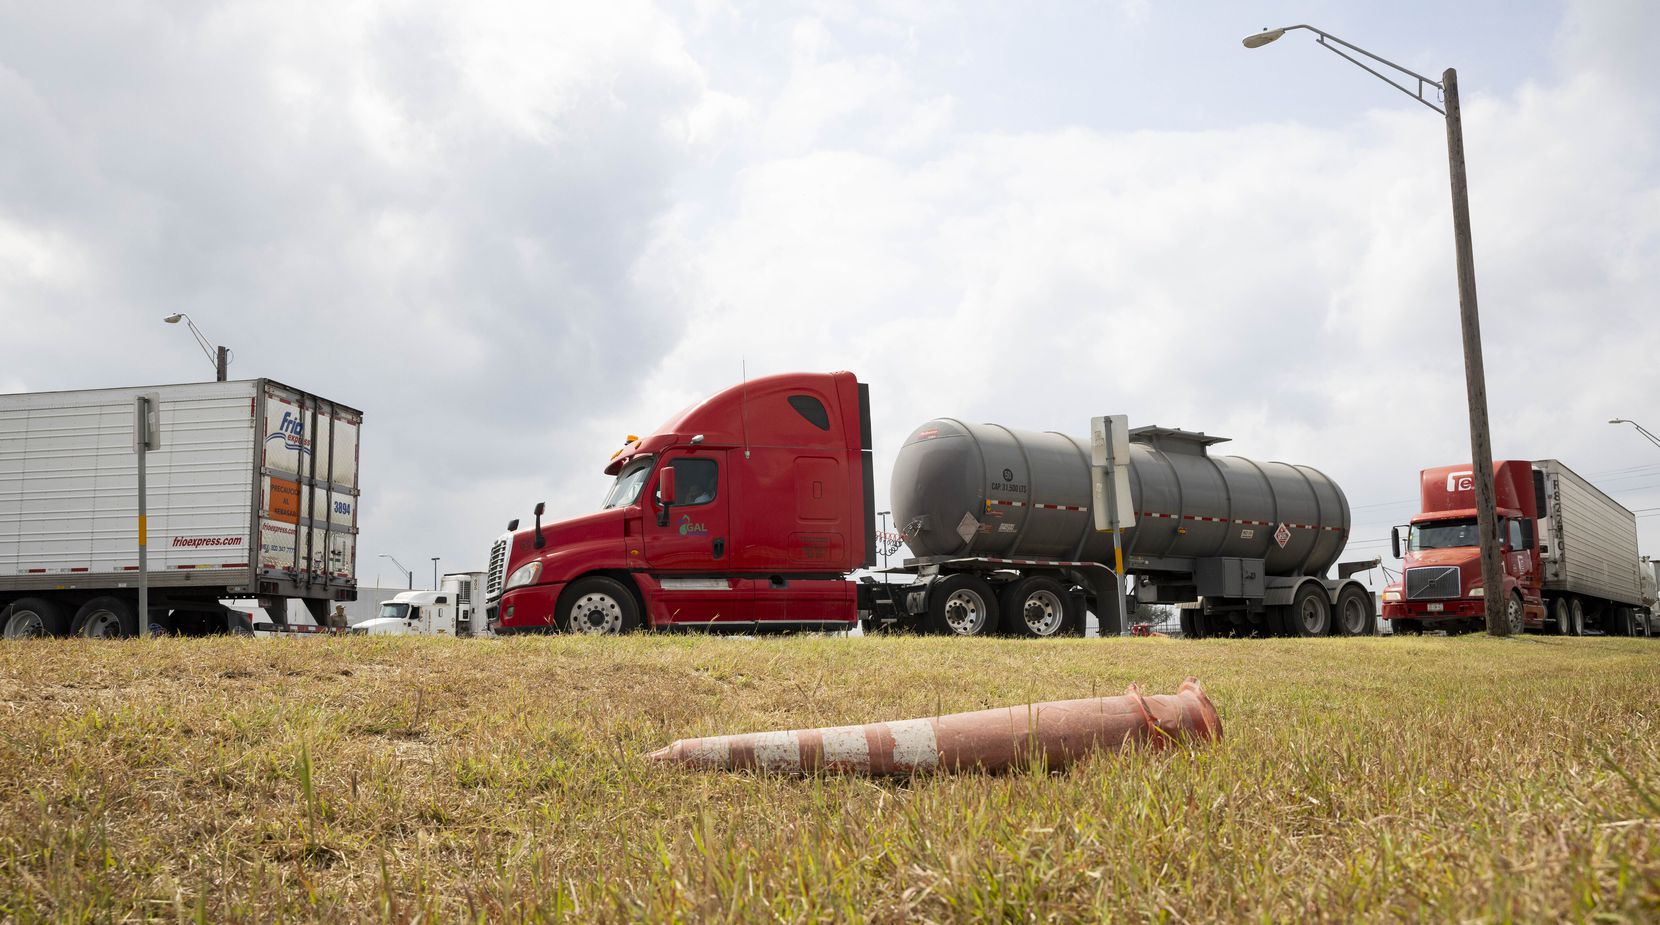 Trucks waited to be inspected by Texas state troopers at an inspection site near the...